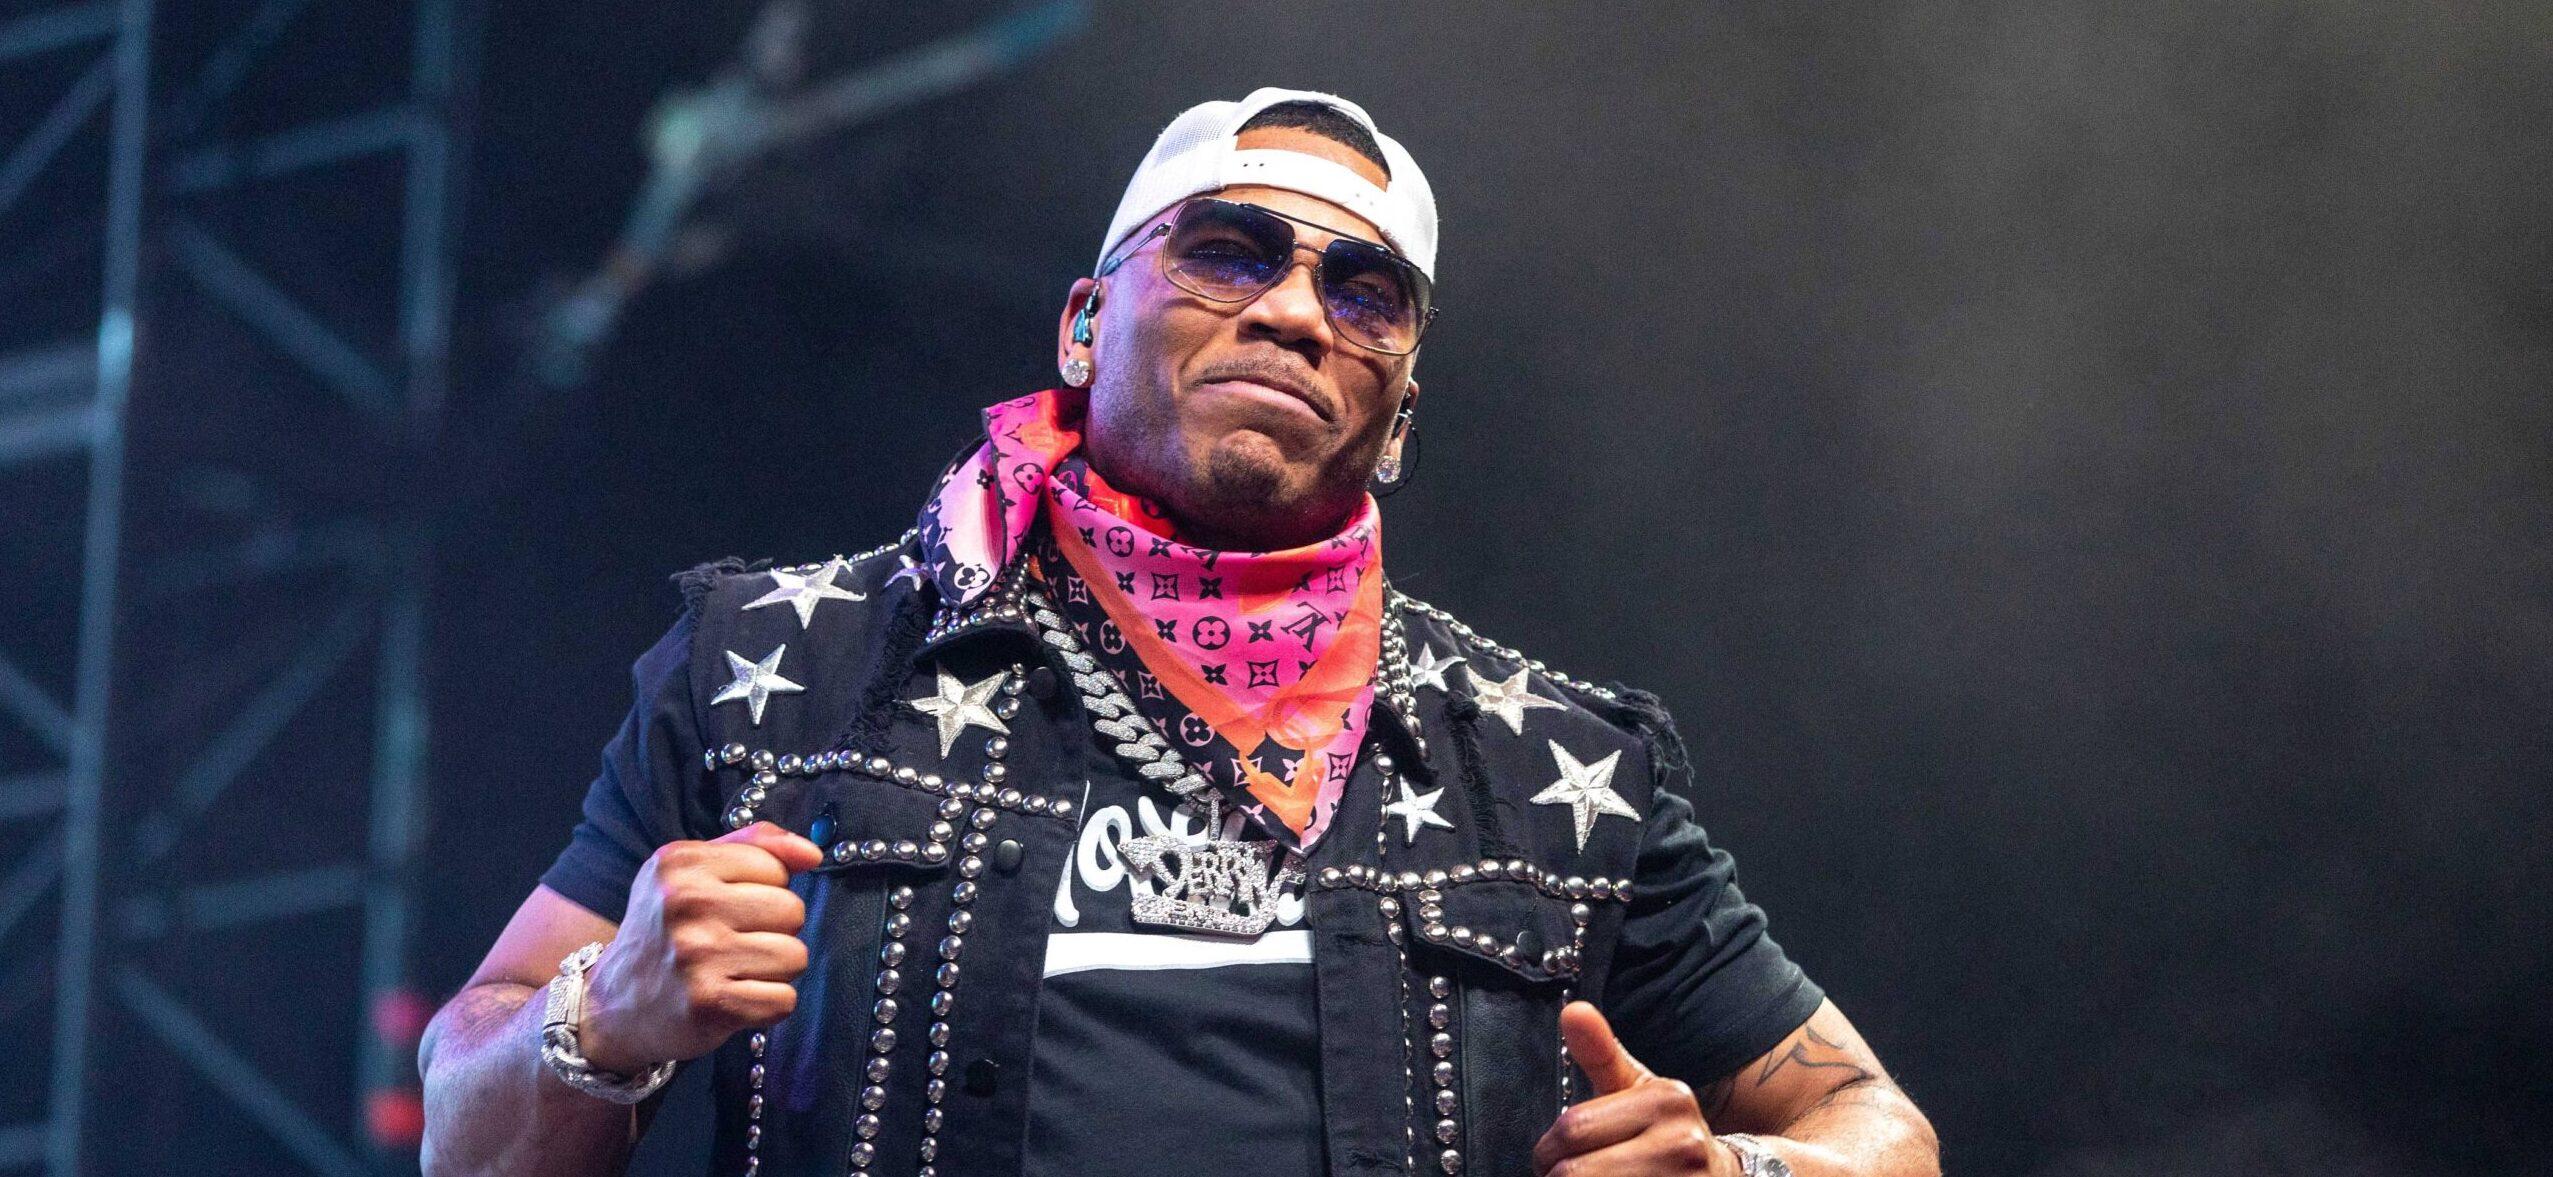 Rapper Nelly at the Stagecoach Music Festival 2023